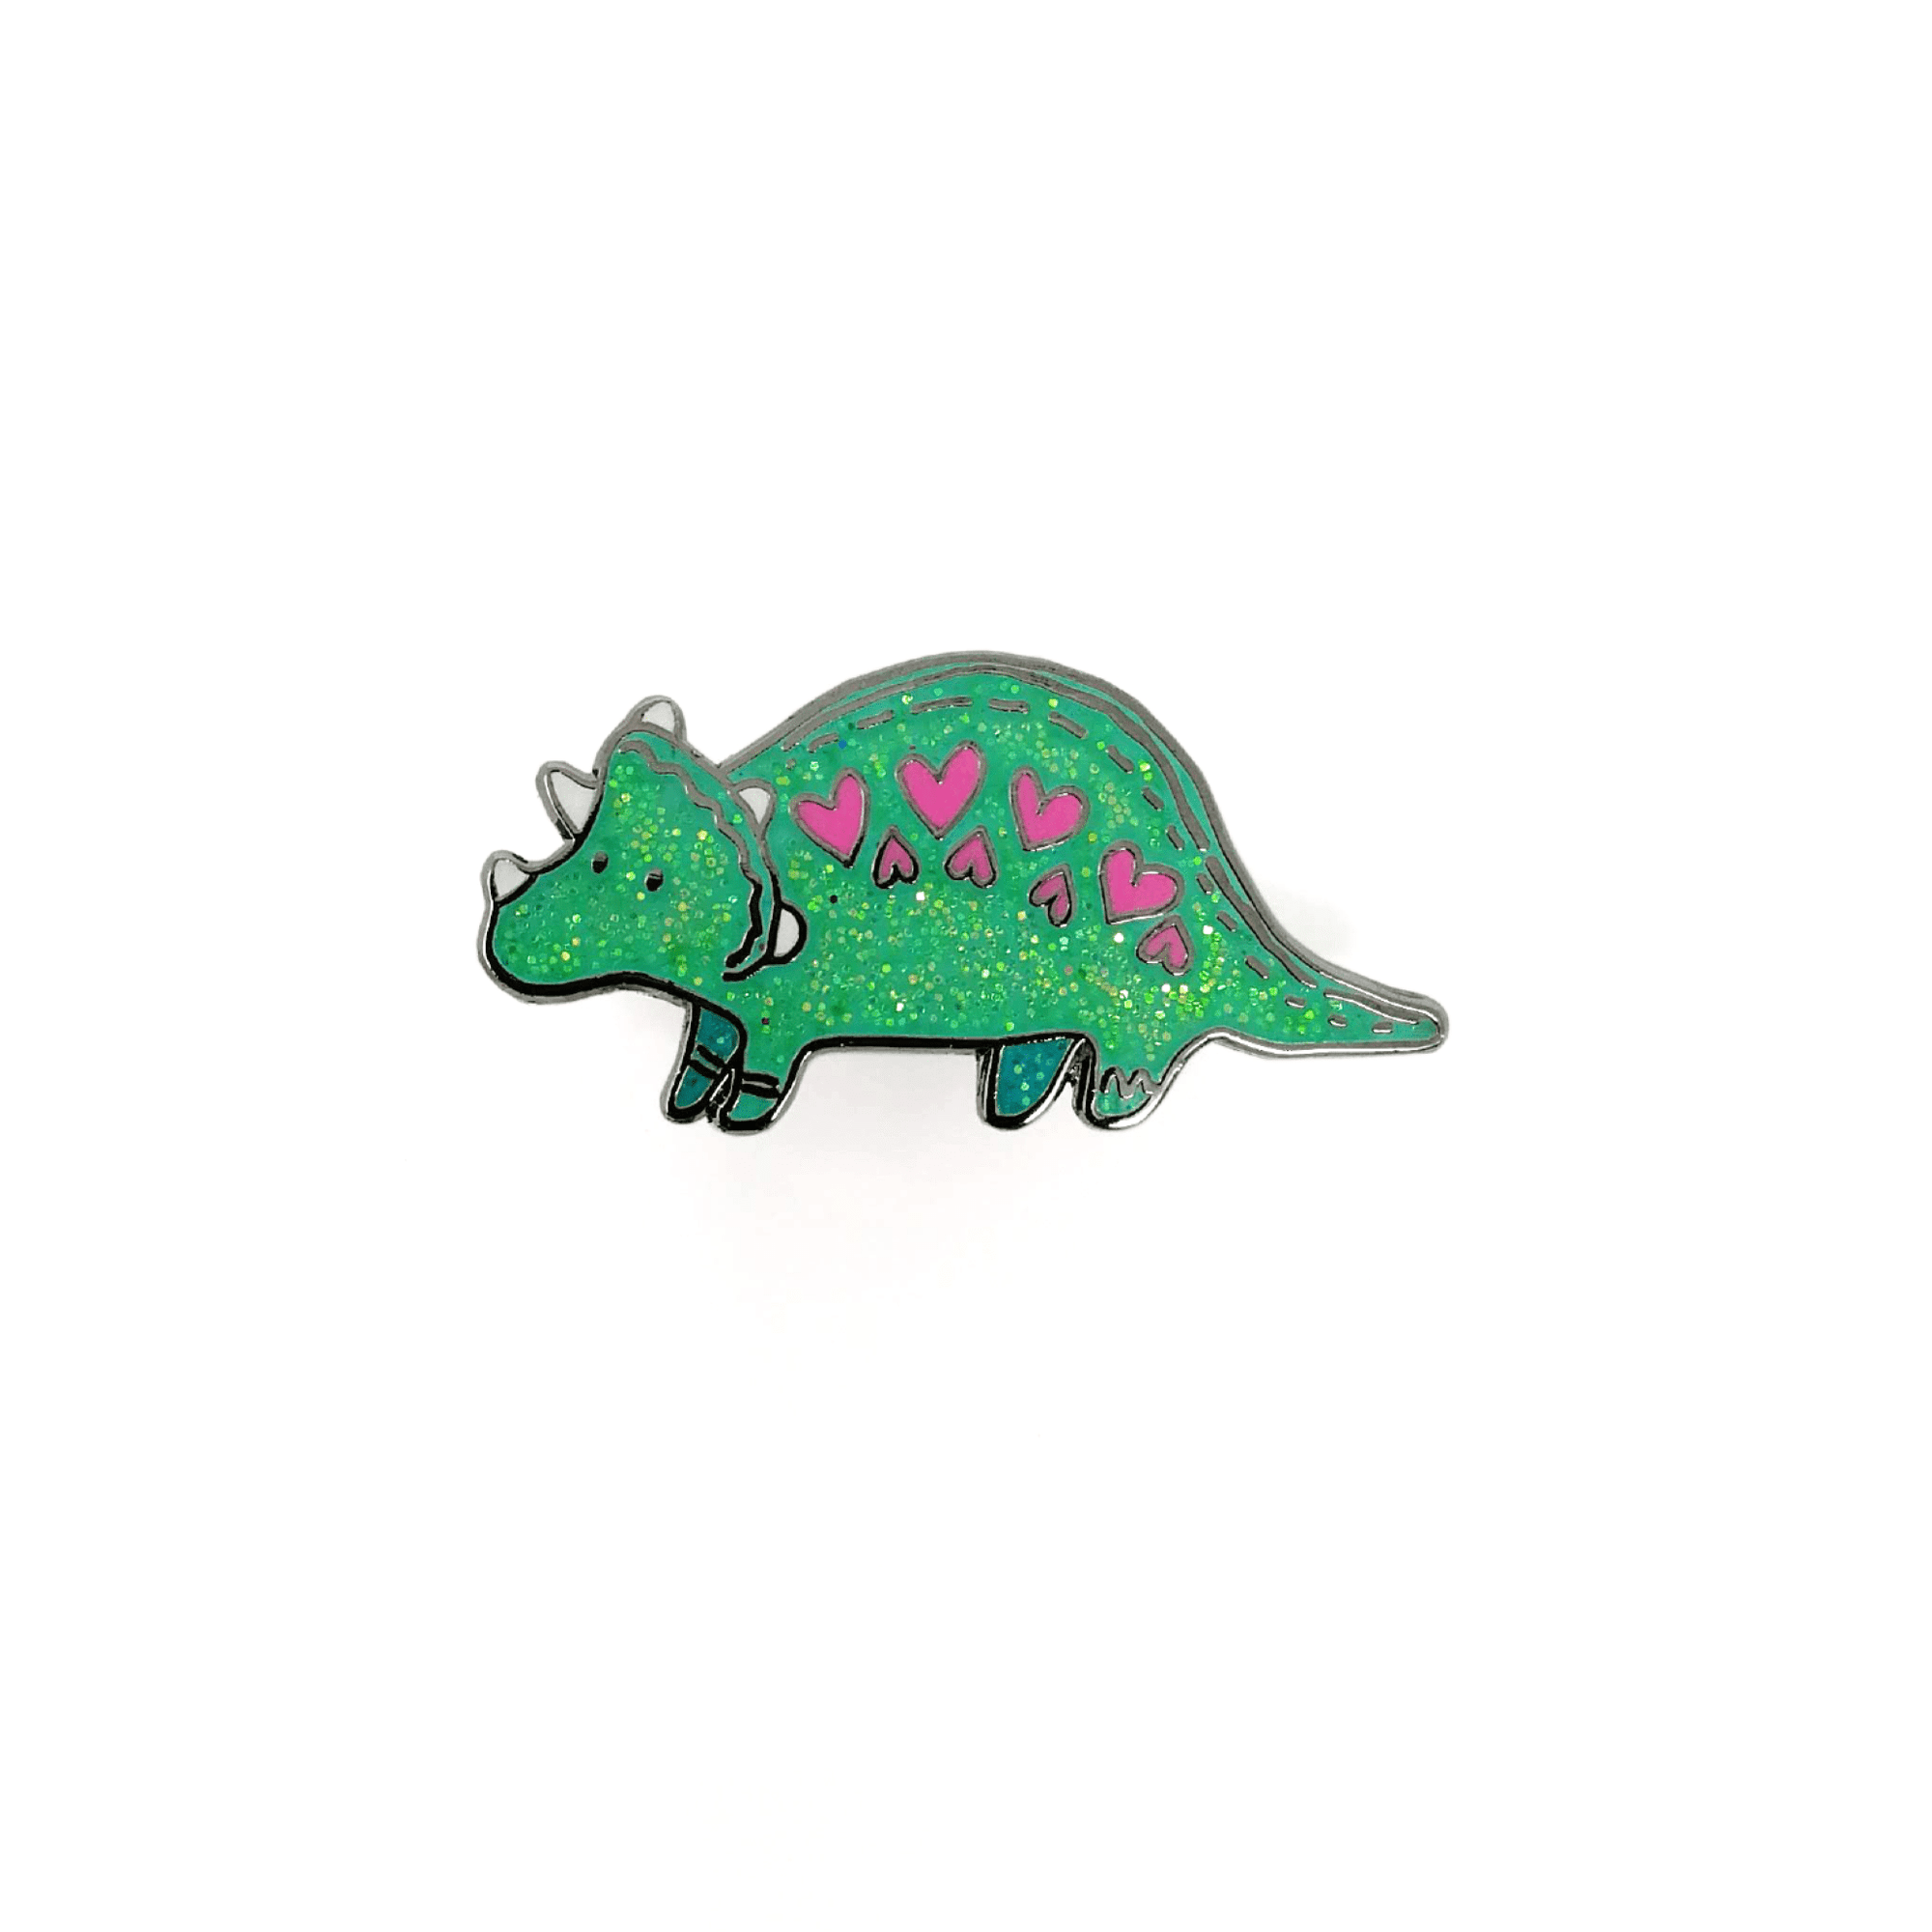 Triceratops Hard Enamel Pin - Extra Glittery! by Anna Alekseeva - Whale and Bird